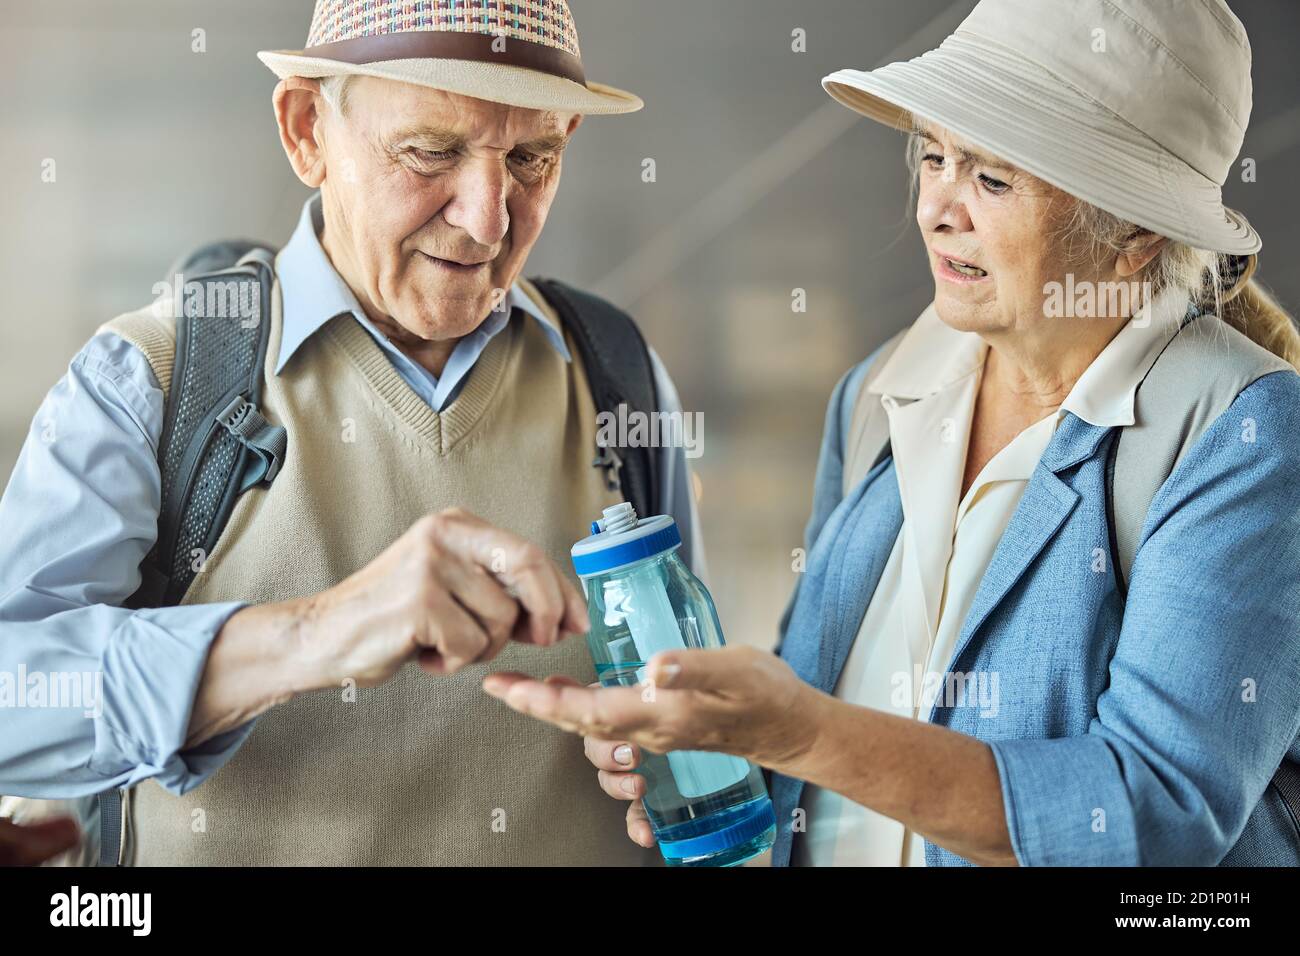 Male tourist taking a medicine from his worried spouse Stock Photo